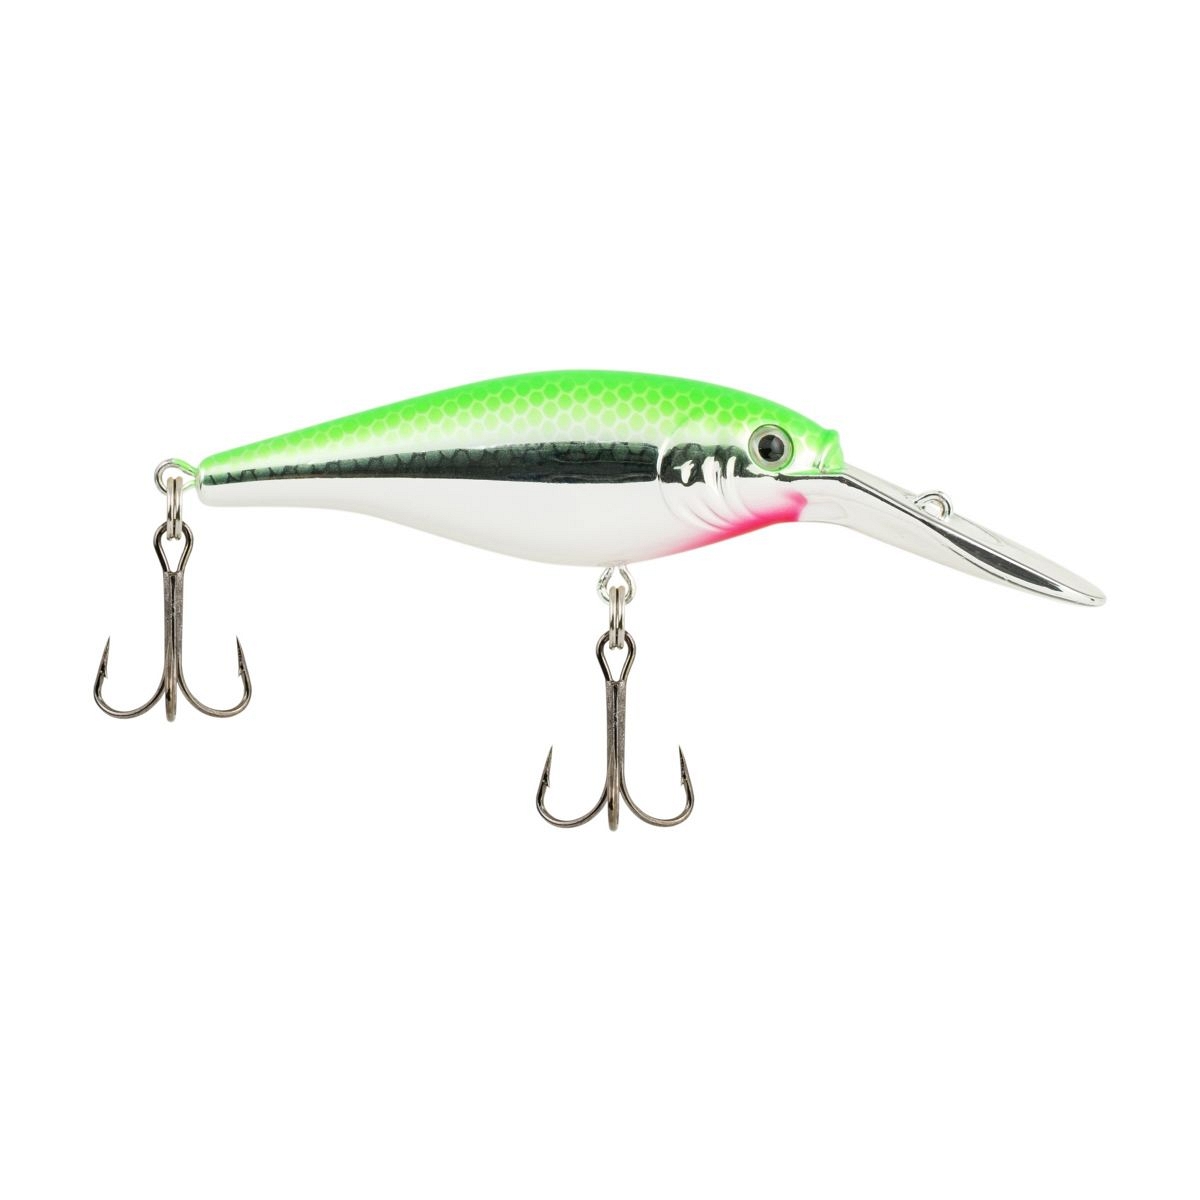 Berkley Flicker Shad 6 Dives 10'-12' Slow Rise FFSH6M Firetail Series  CHOOSE YOUR COLOR!